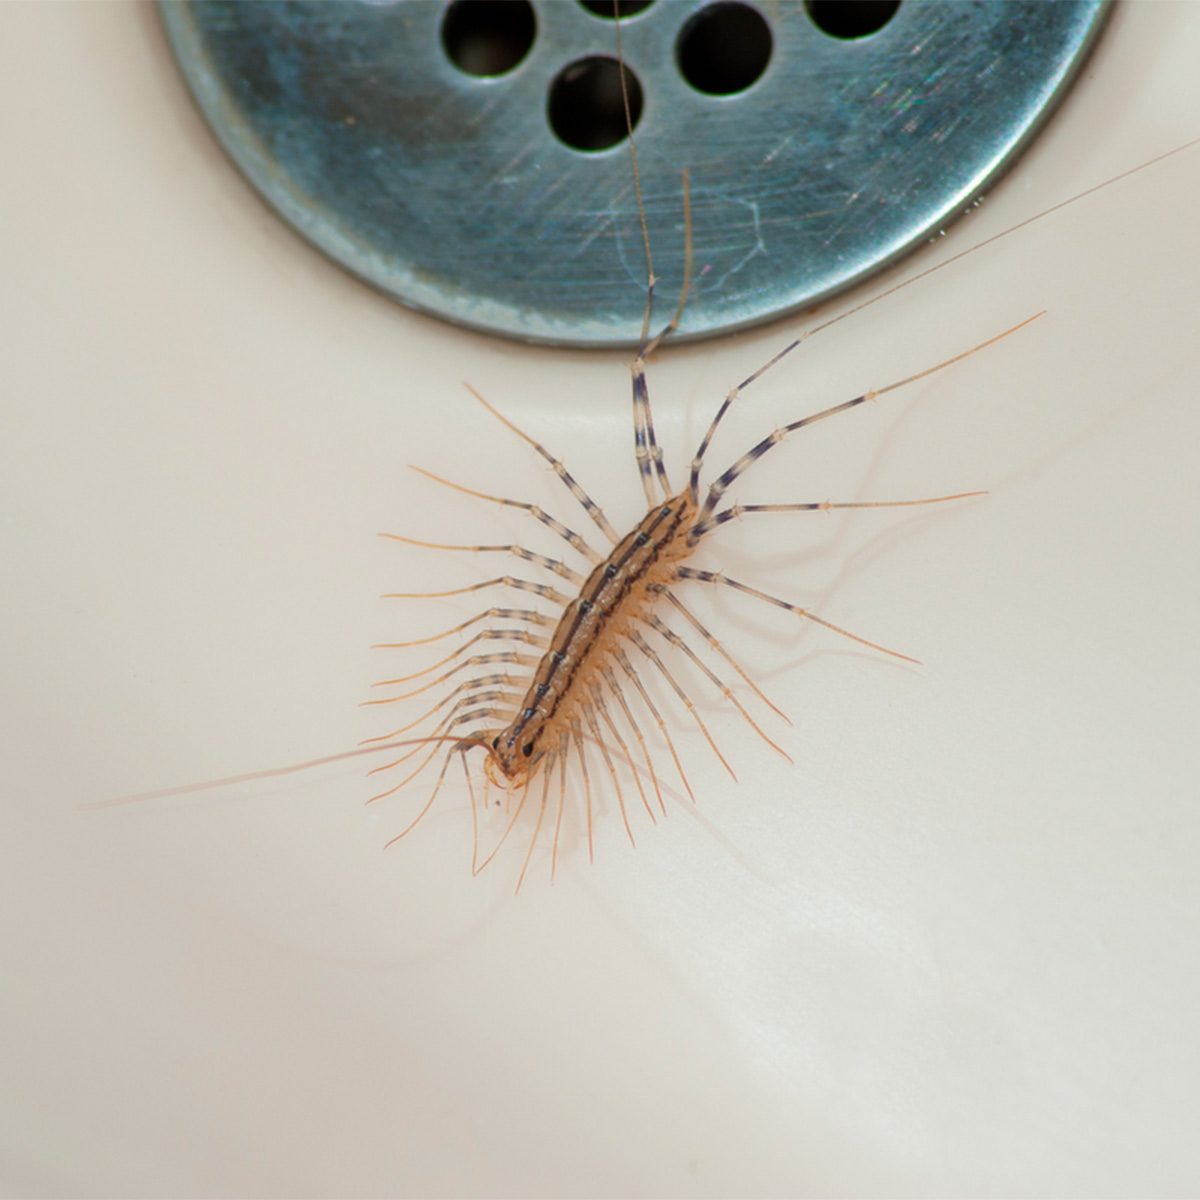 How to Get Rid of House Centipedes | Family Handyman